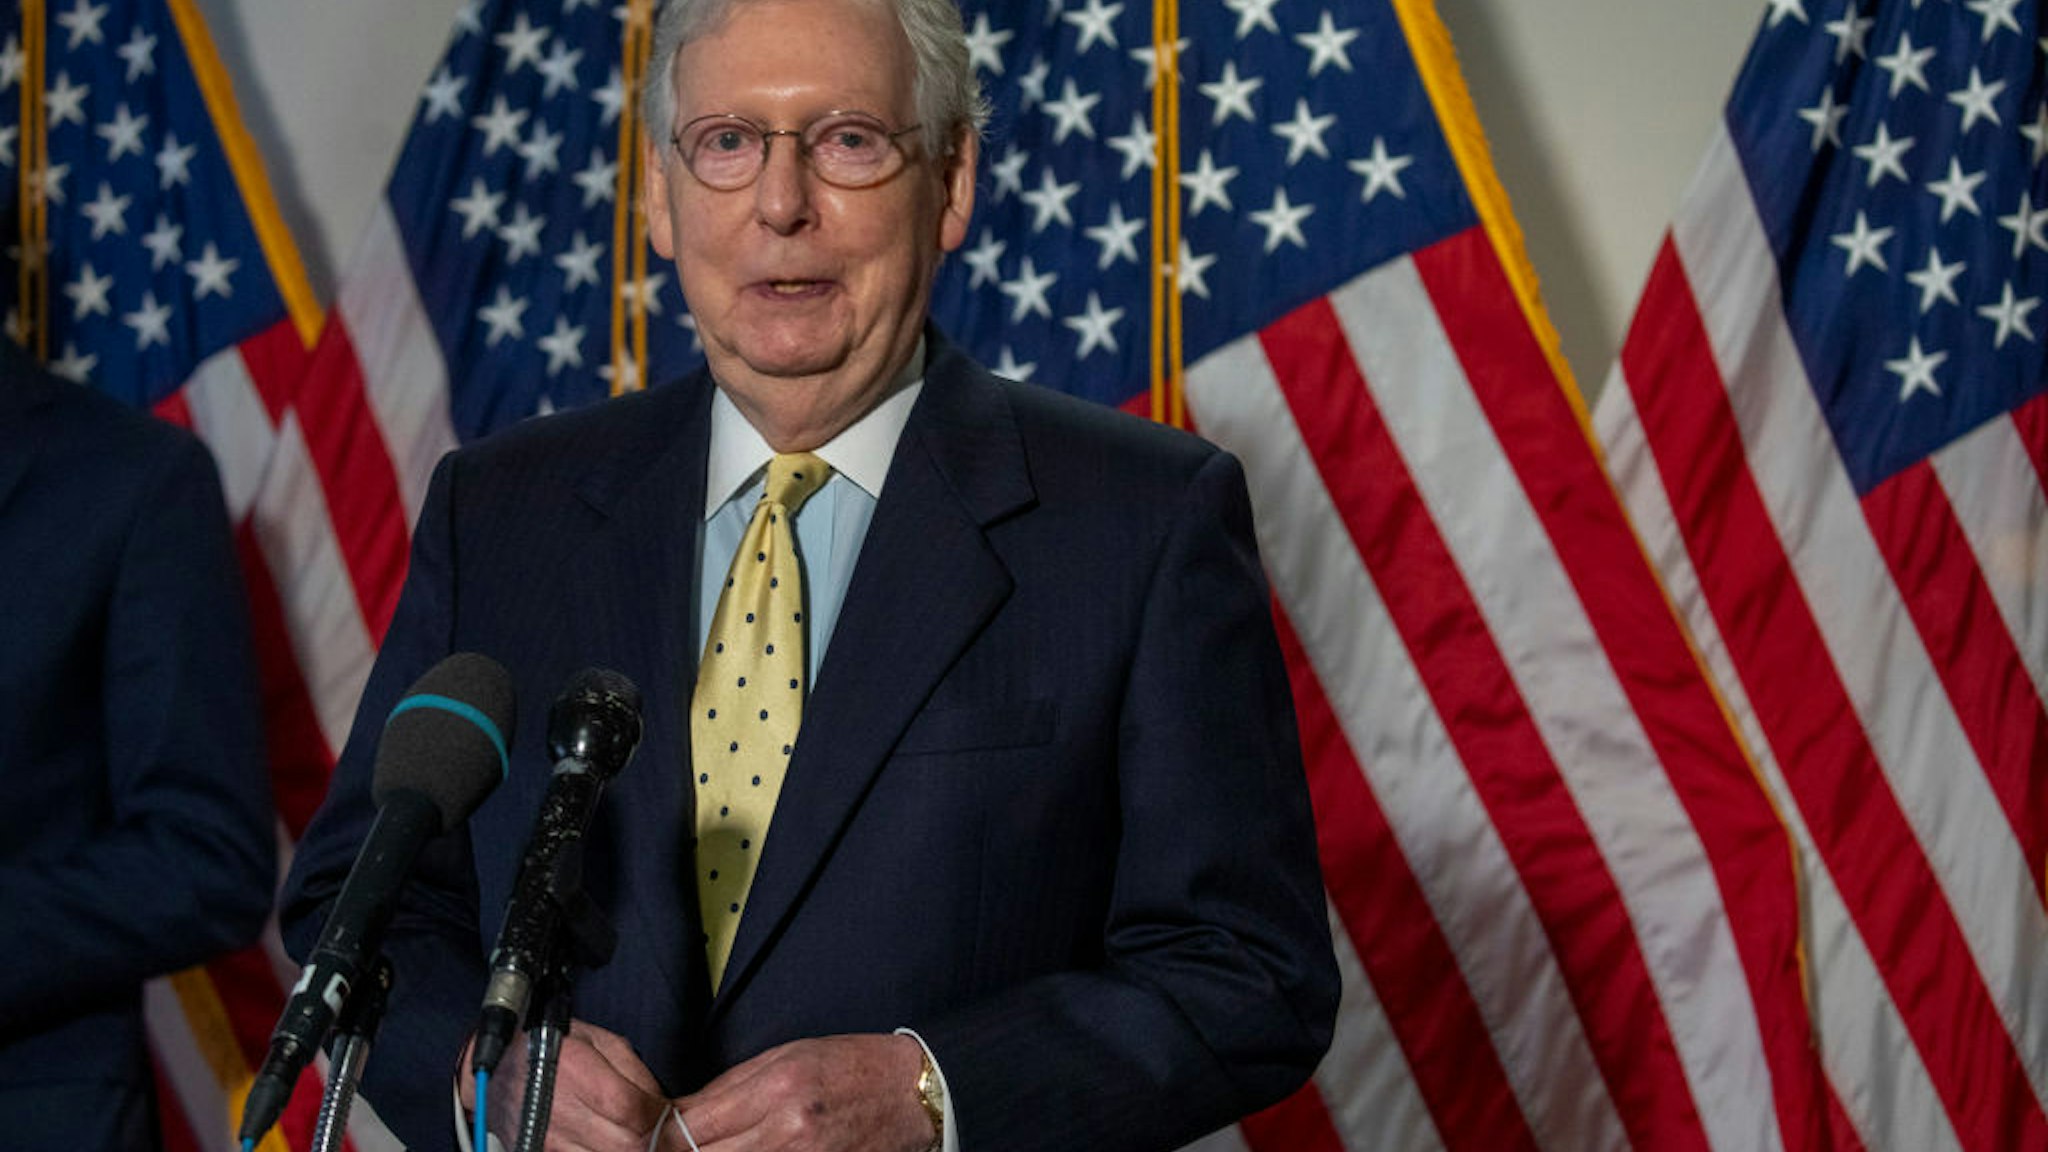 Senate Majority Leader Mitch McConnell (R-KY) speaks to the media after weekly policy luncheons on Capitol Hill July 21, 2020 in Washington, DC.